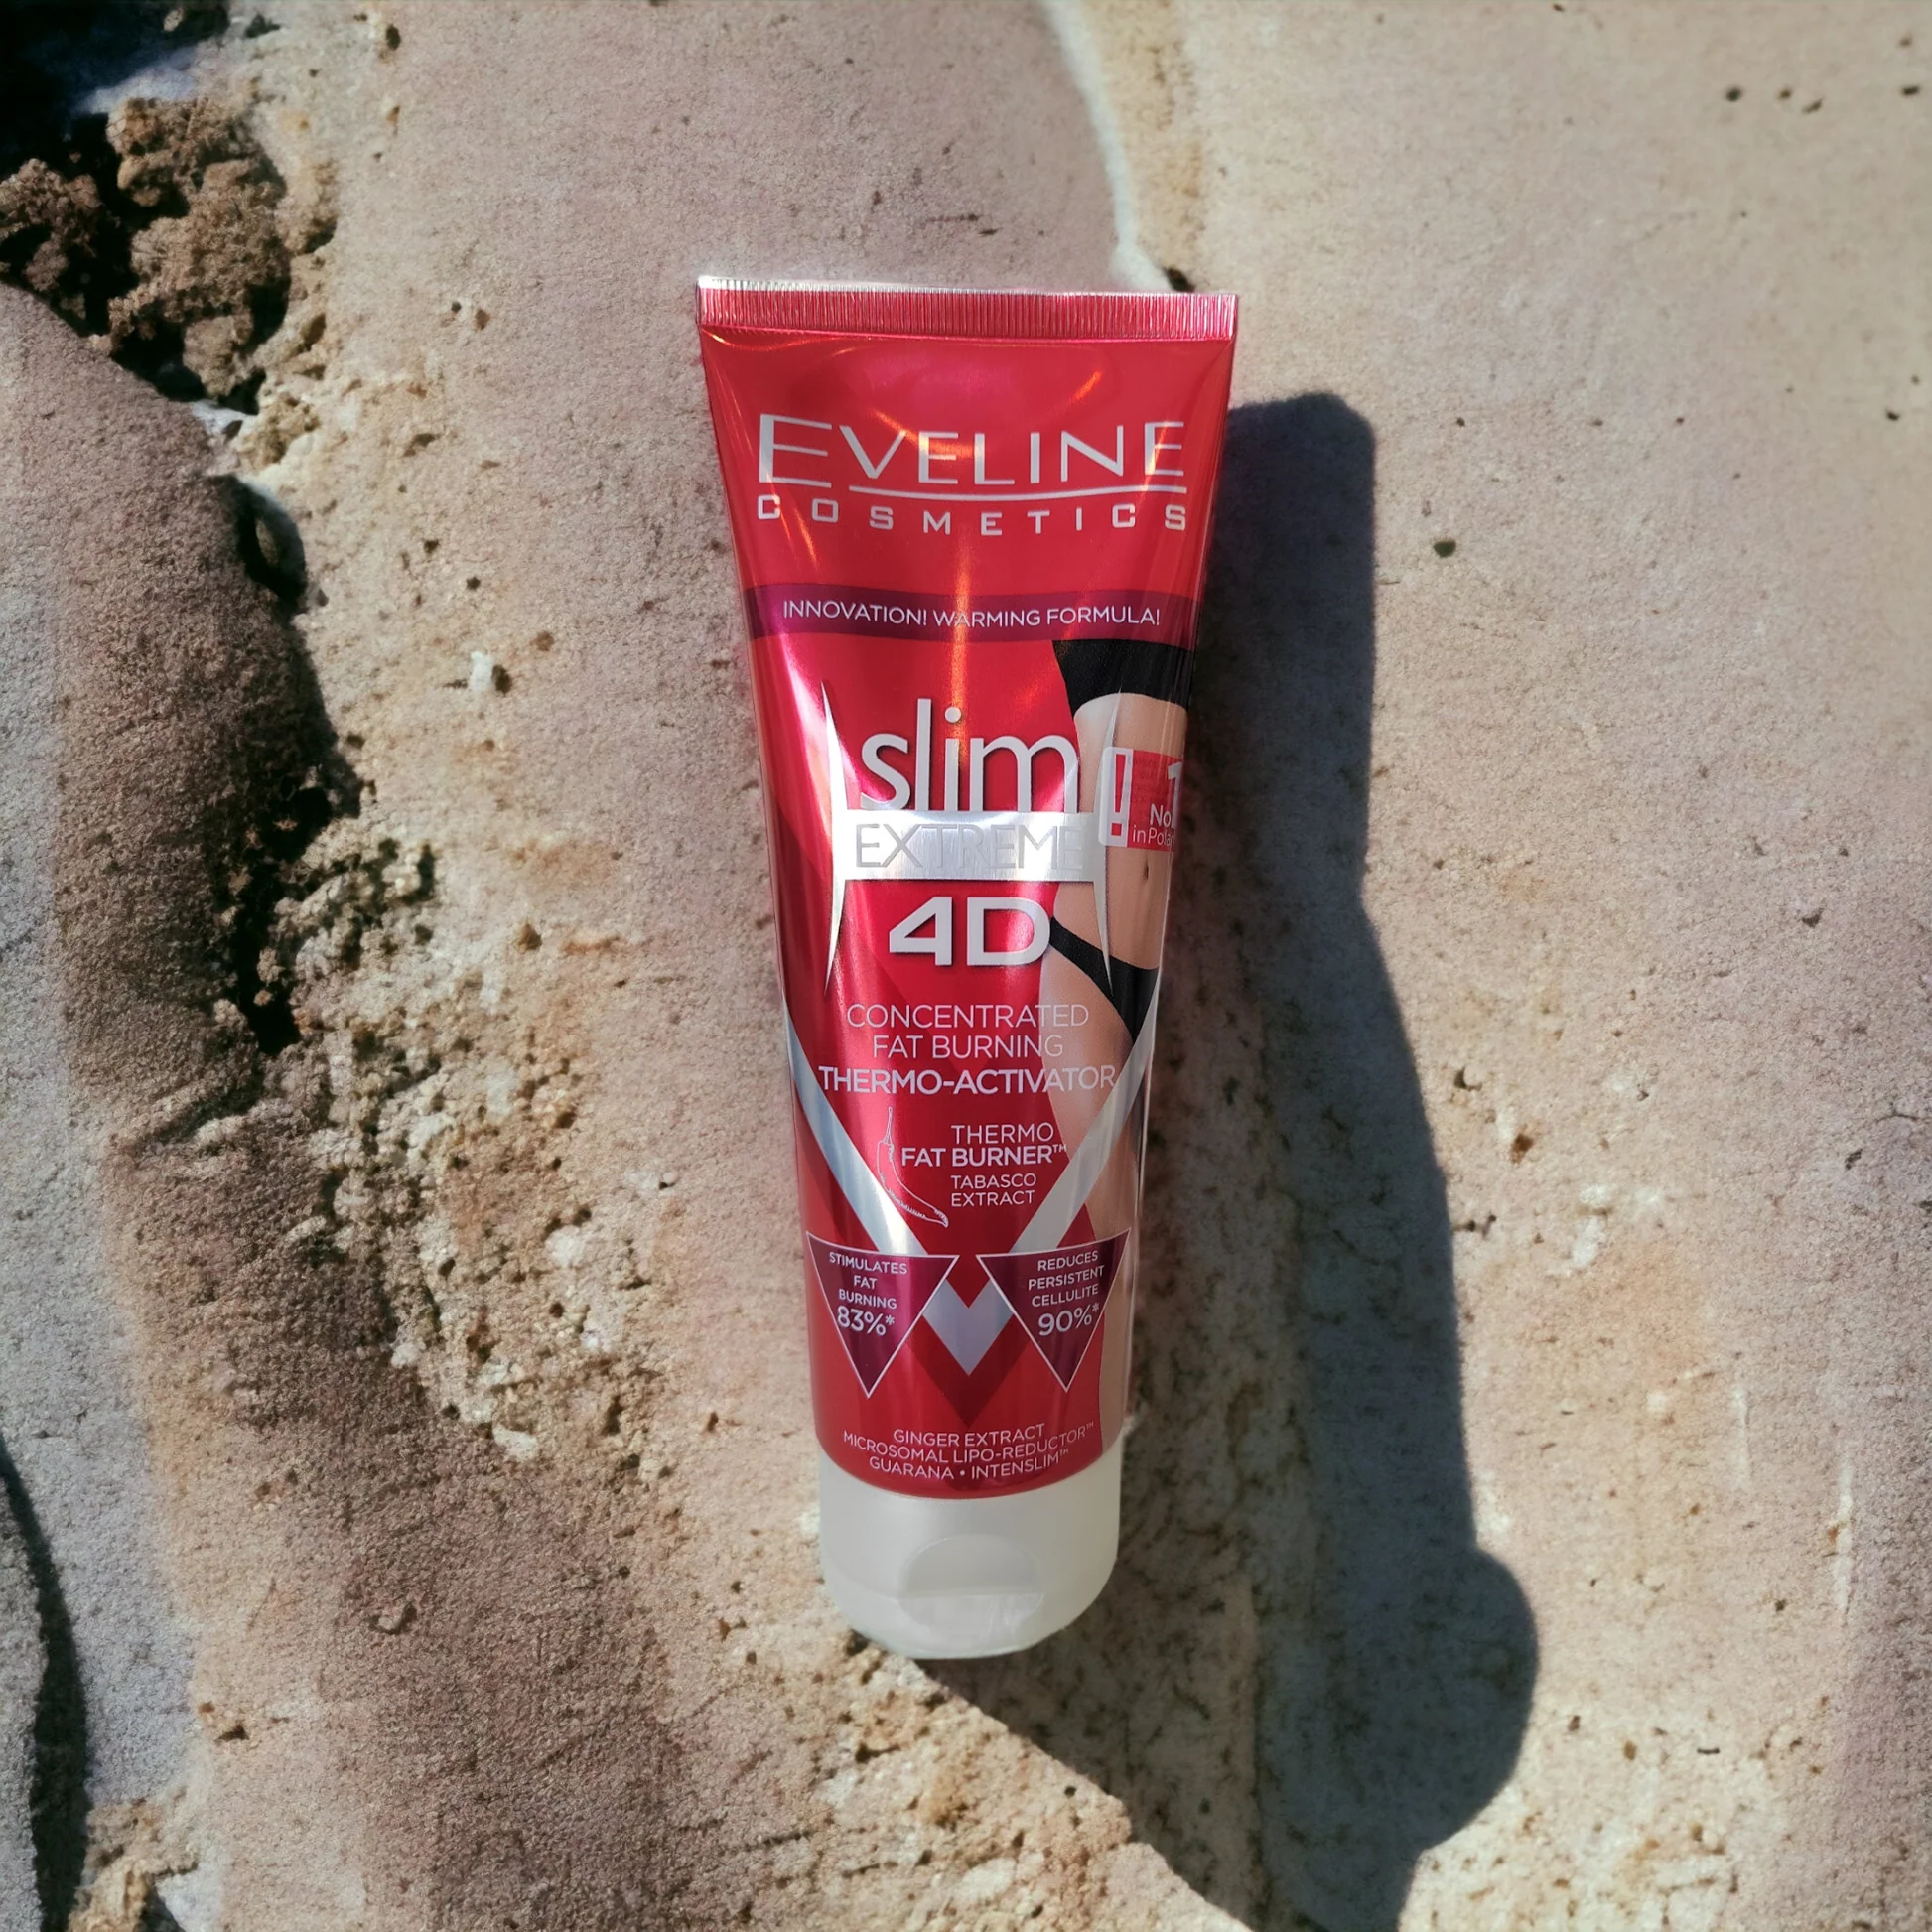 Eveline Cosmetics Slim Extreme 4d Concentrated Fat Burning Thermo Activator 250 Ml Review